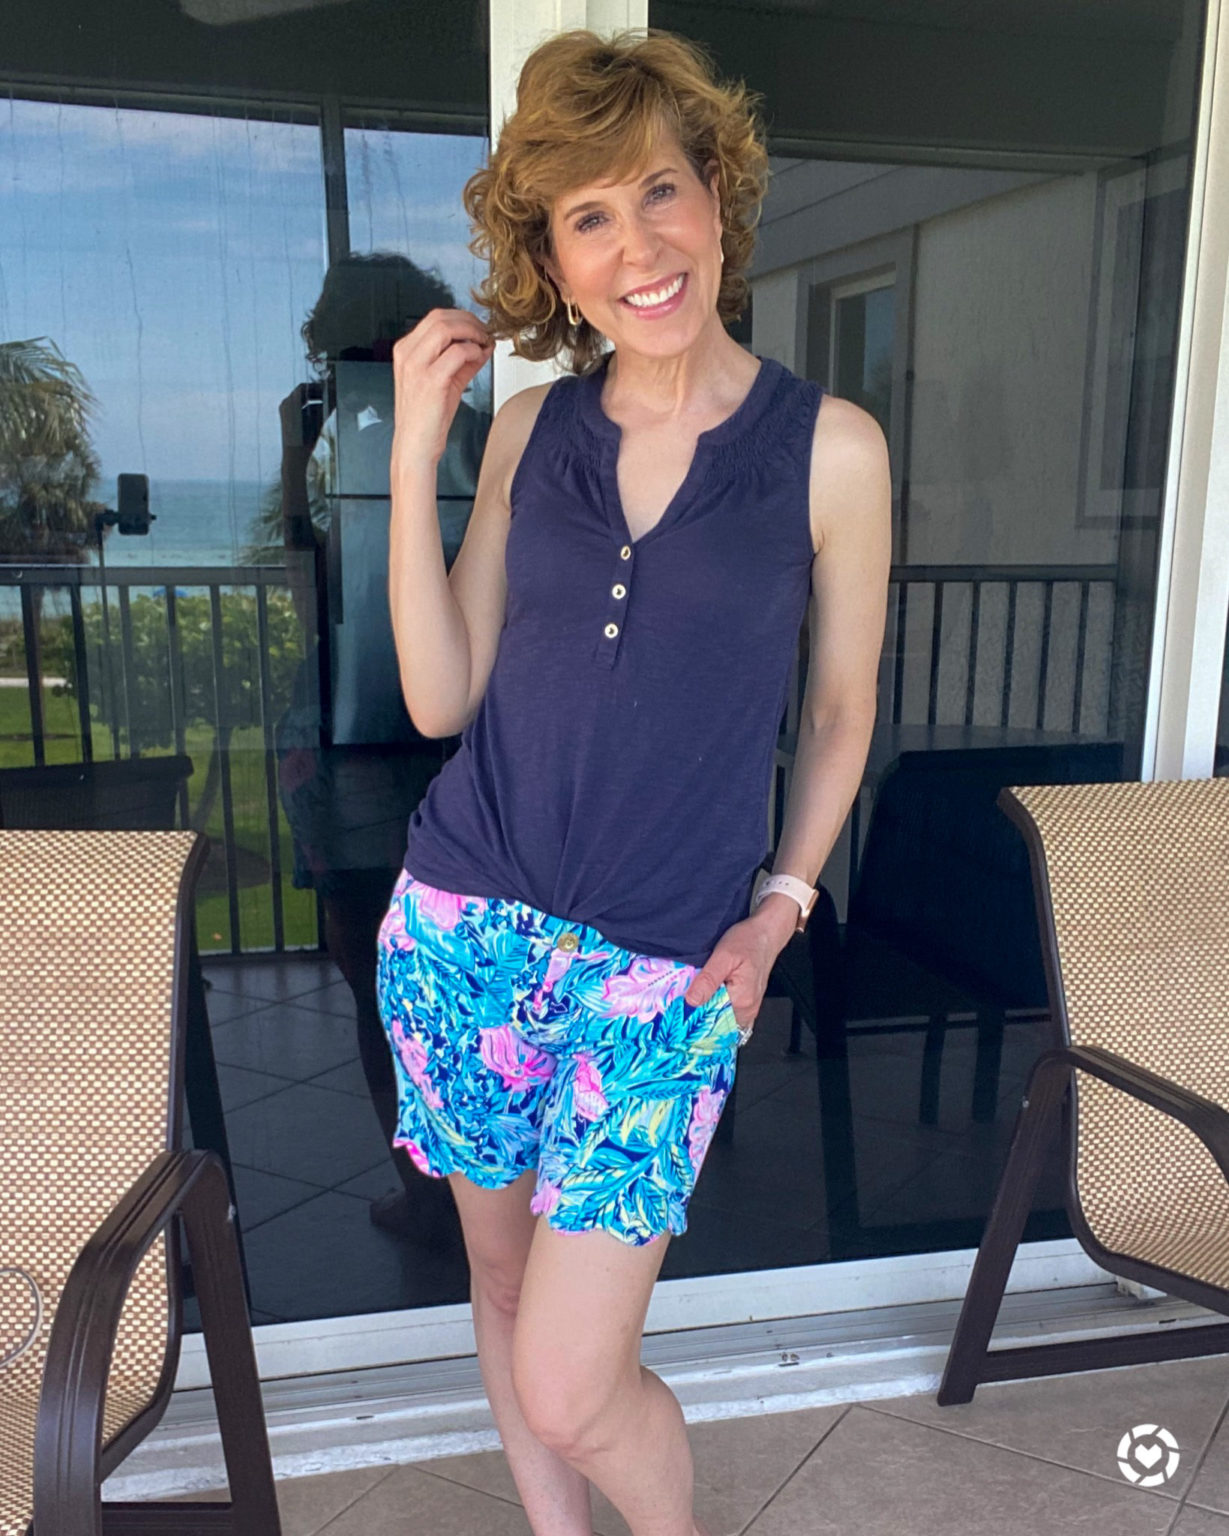 woman wearing lilly pulitzer short and top standing on patio